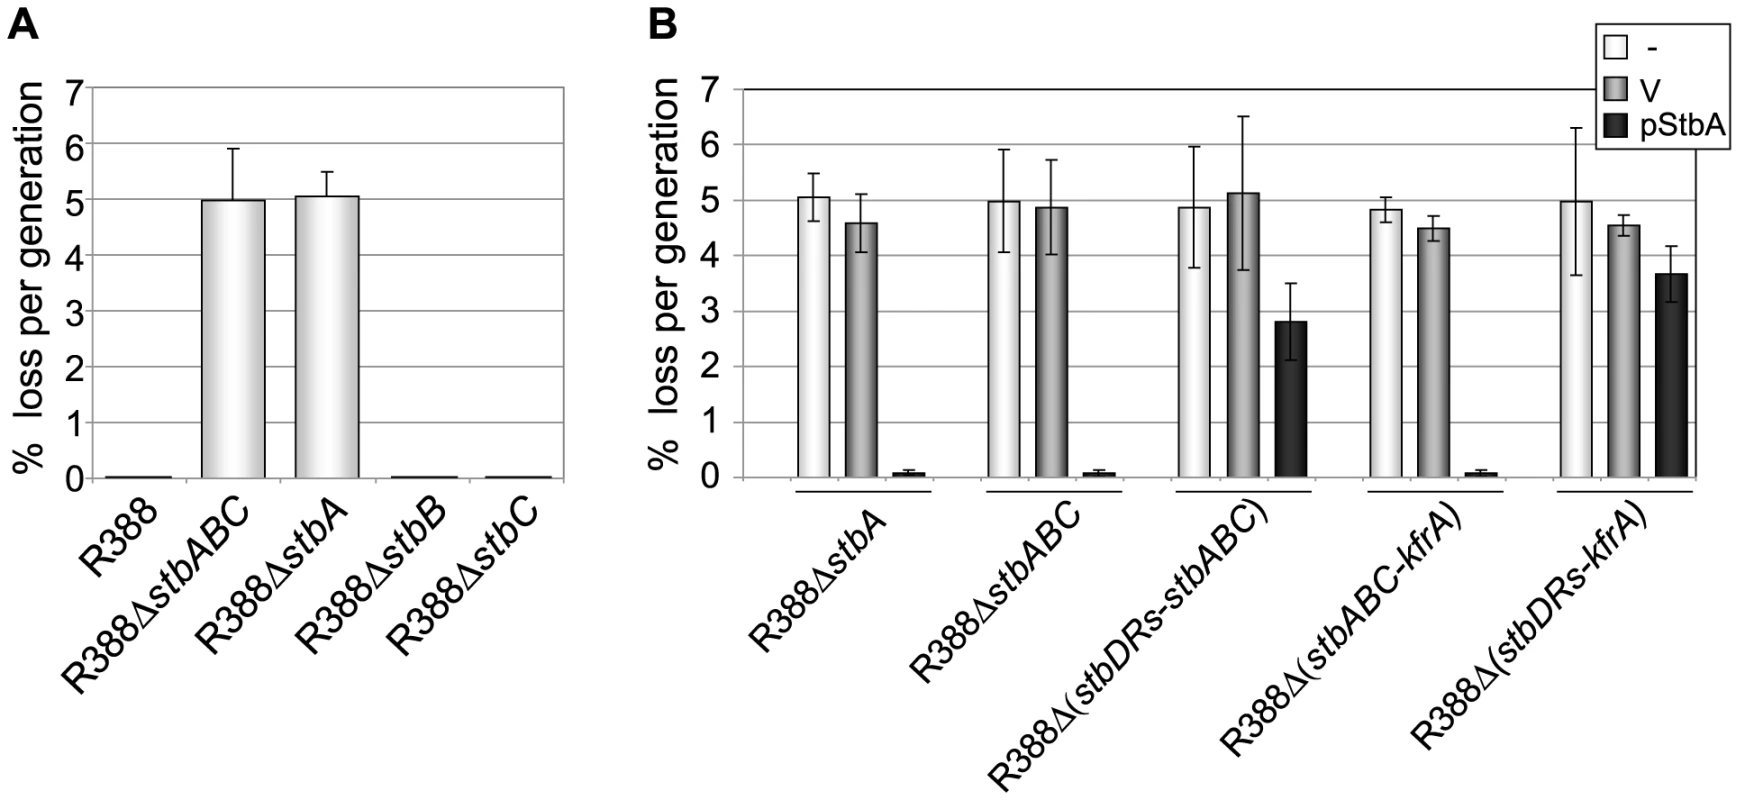 Stability of plasmid R388 derivatives.